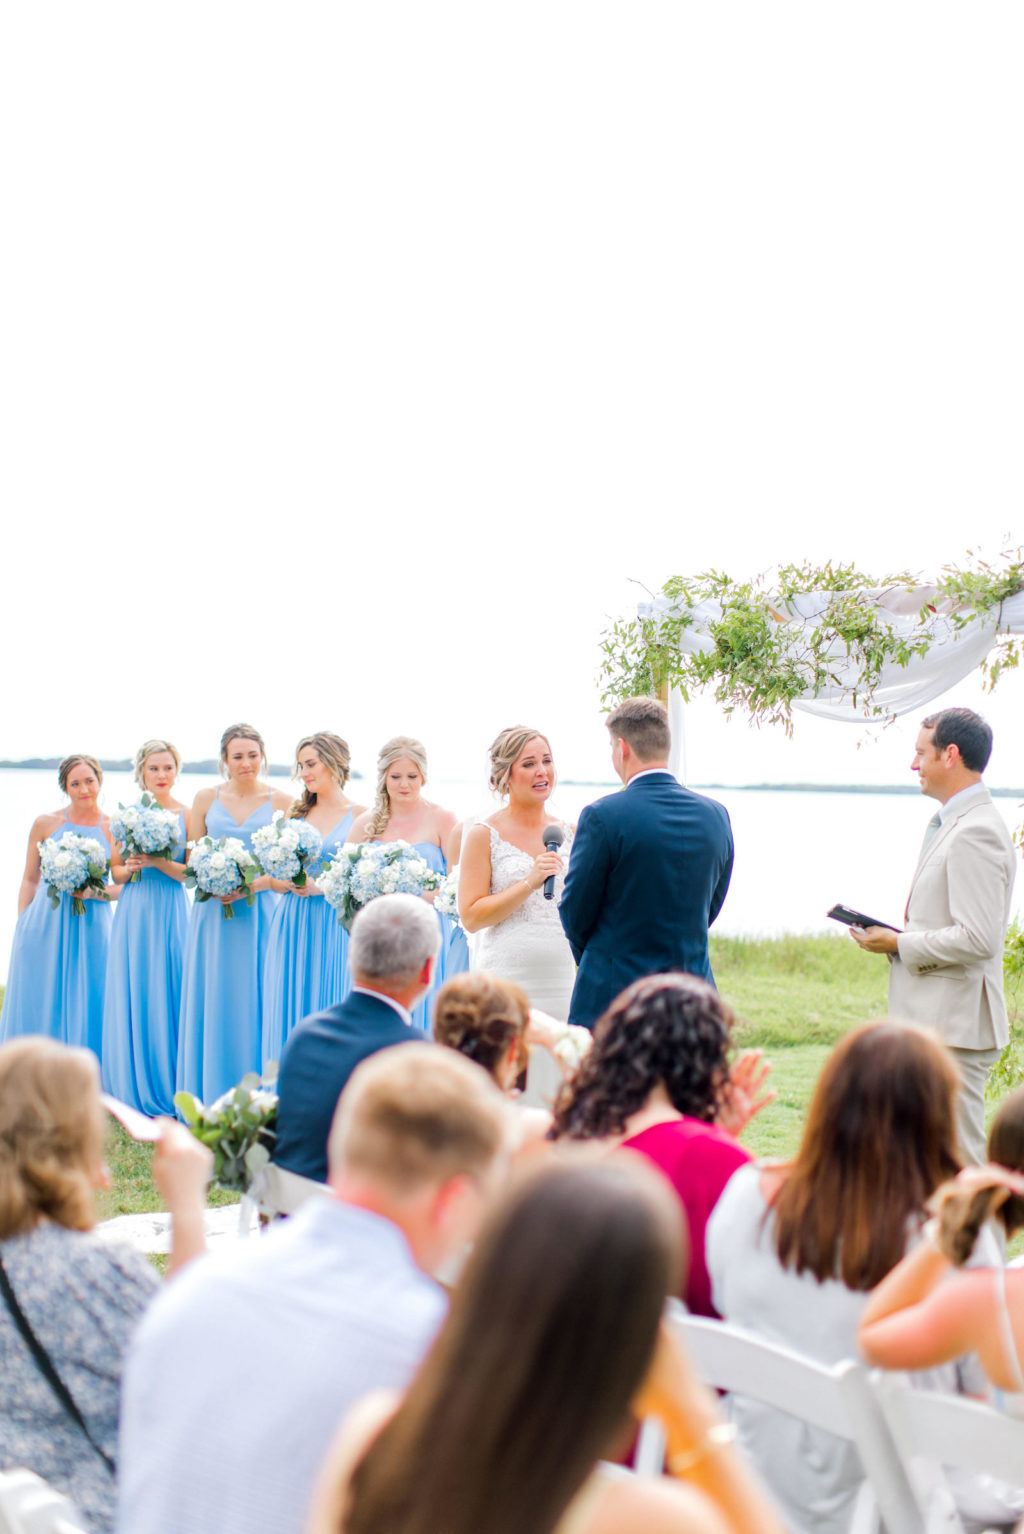 Bride and Groom Exchange Vows | Tampa Waterfront Wedding Ceremony